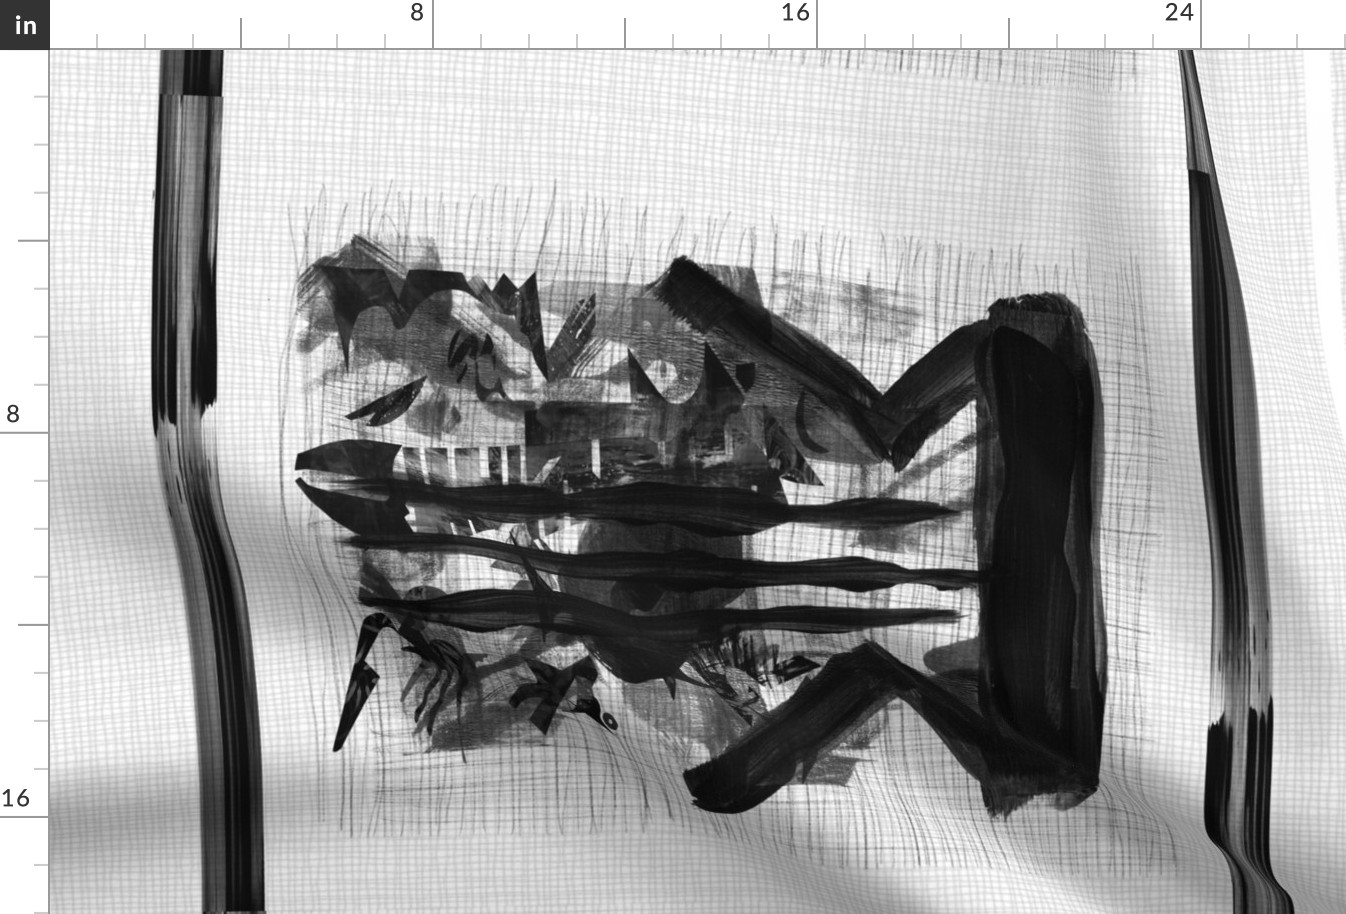 tea towel wall hanging abstract black and white brushstrokes music